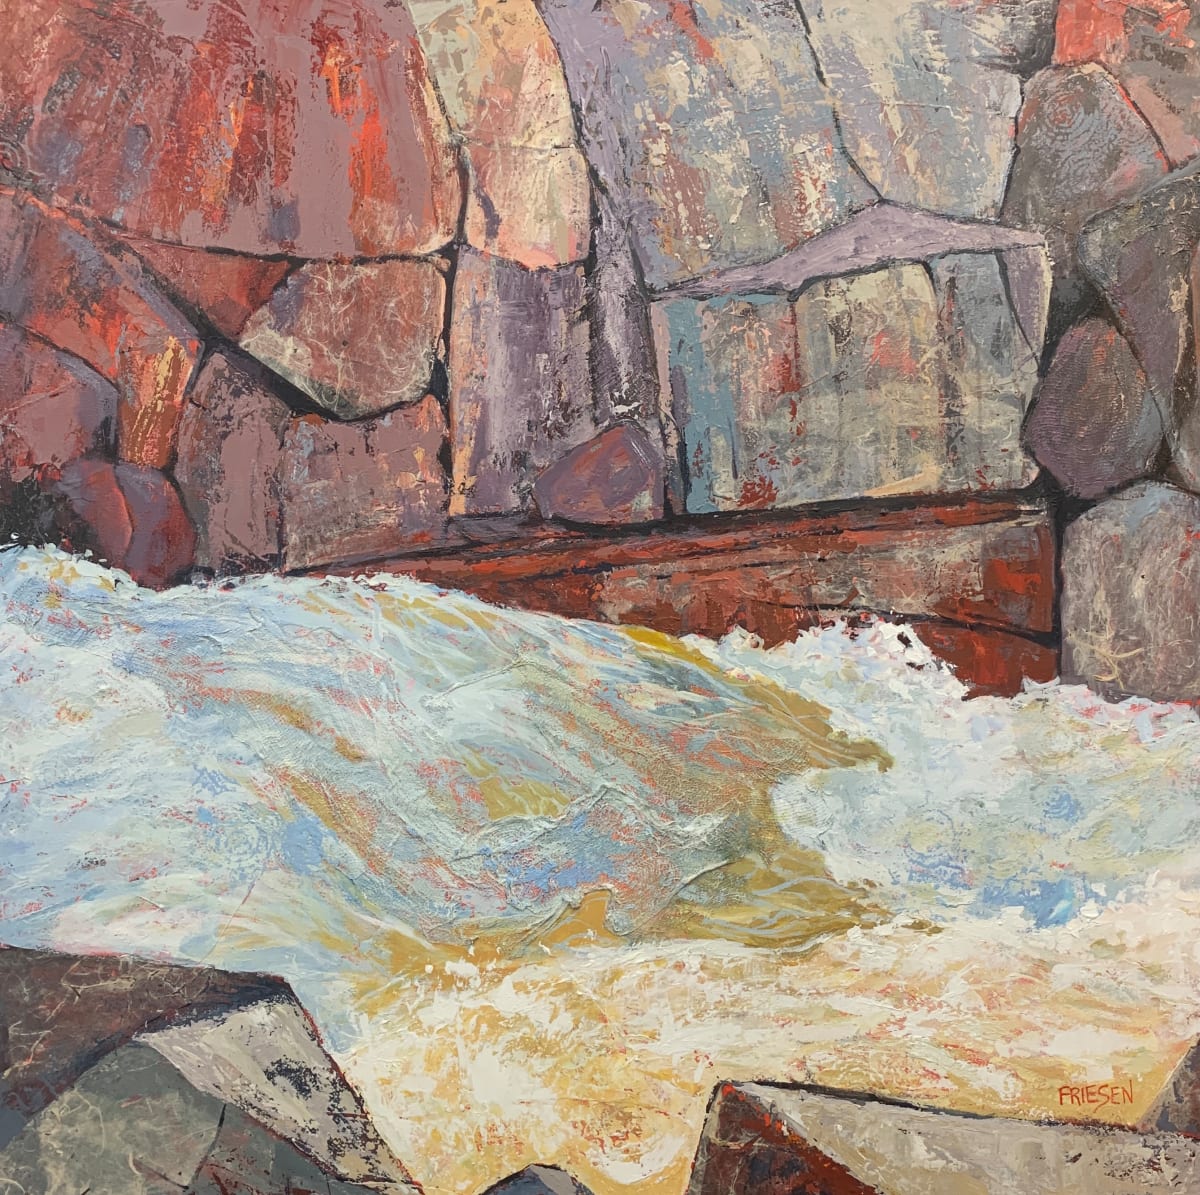 Earth River (The Flume) by Holly Friesen 